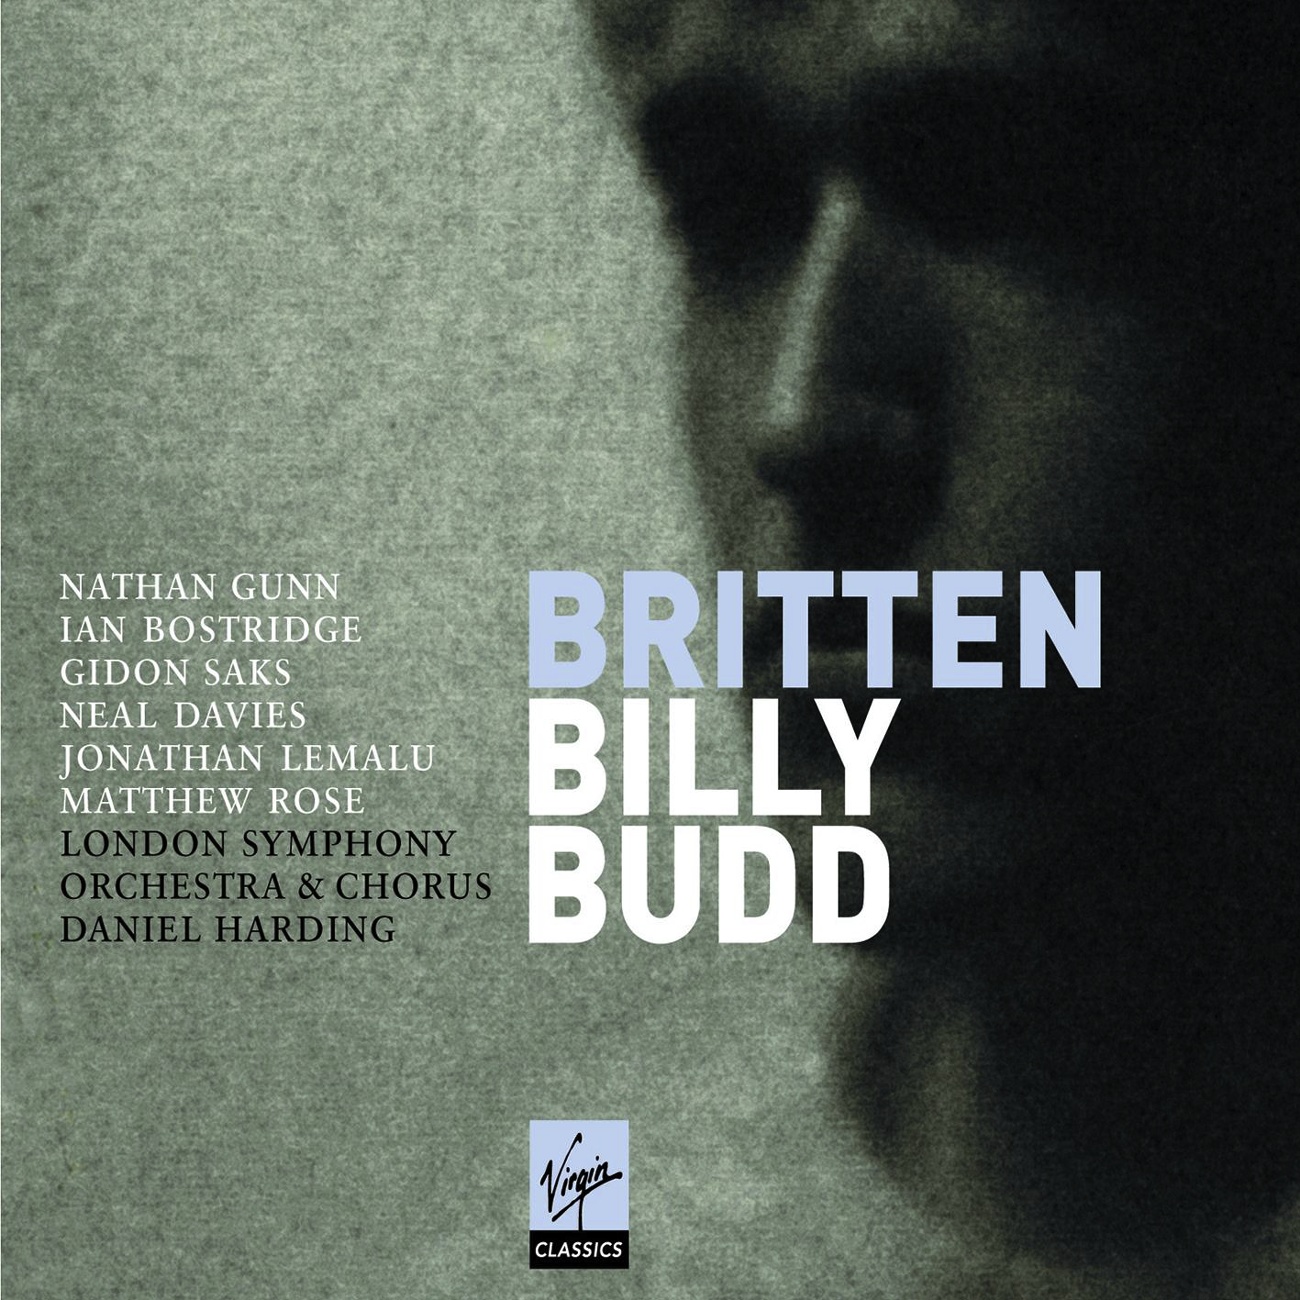 Billy Budd: I don't like the look of the mist (Vere/First Lieutenant)